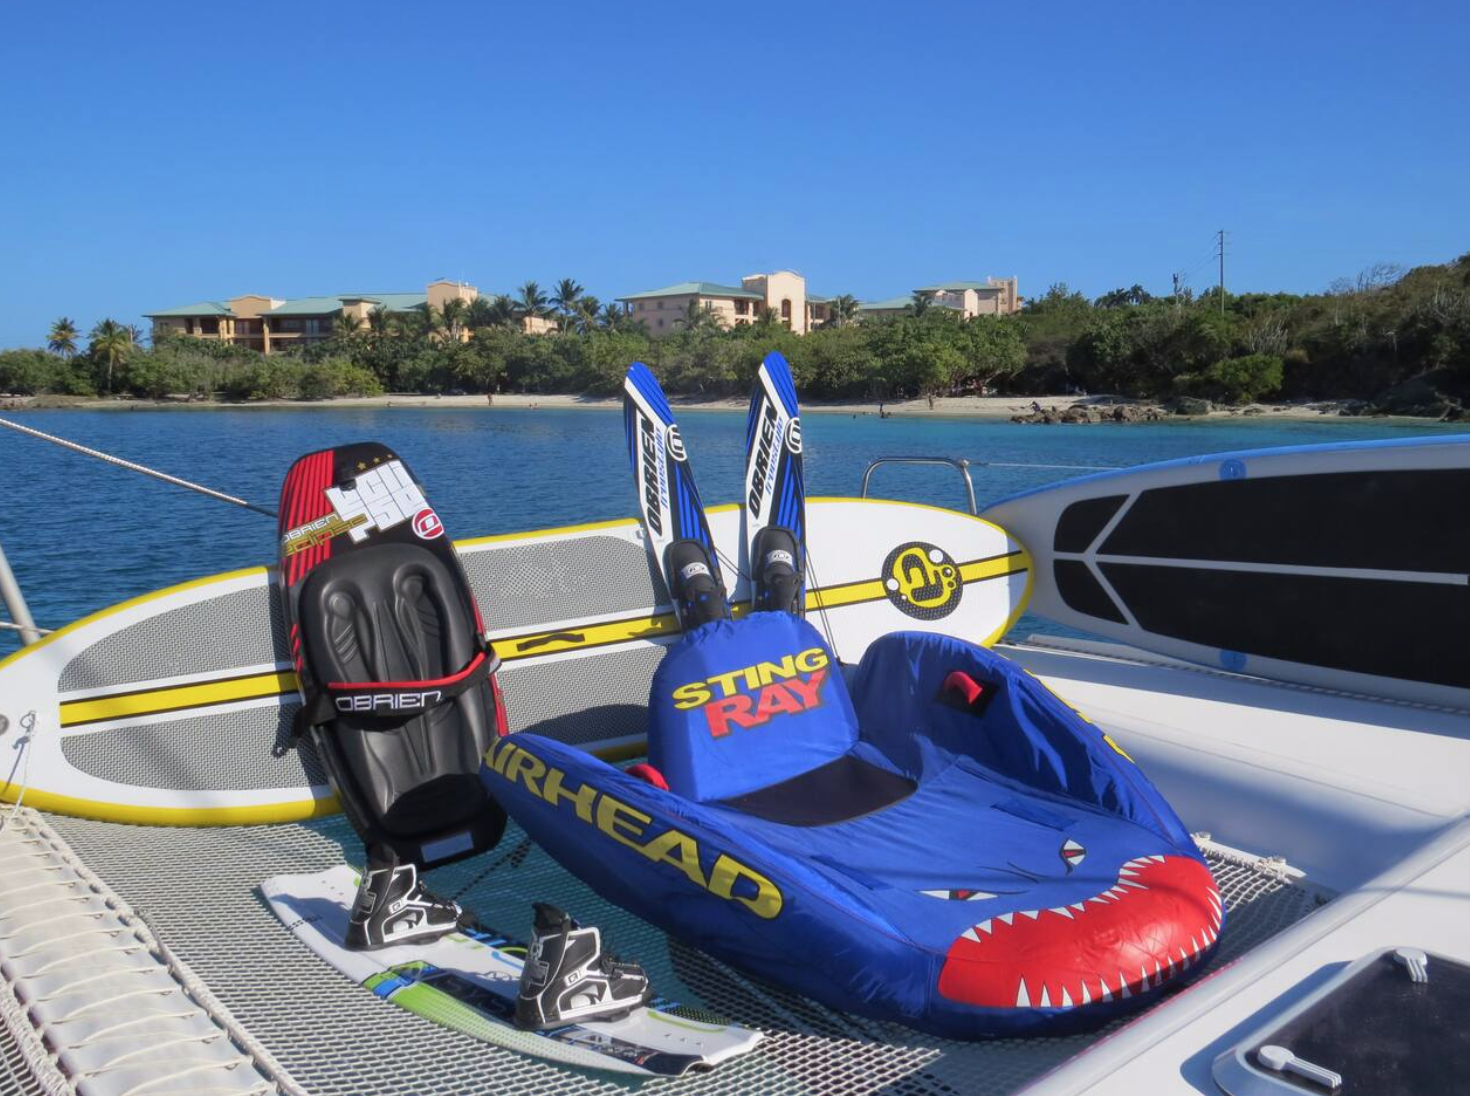 Water sport equipment comes with your Airbnb rental of a 4-Cabin Catamaran in USVI and BVI